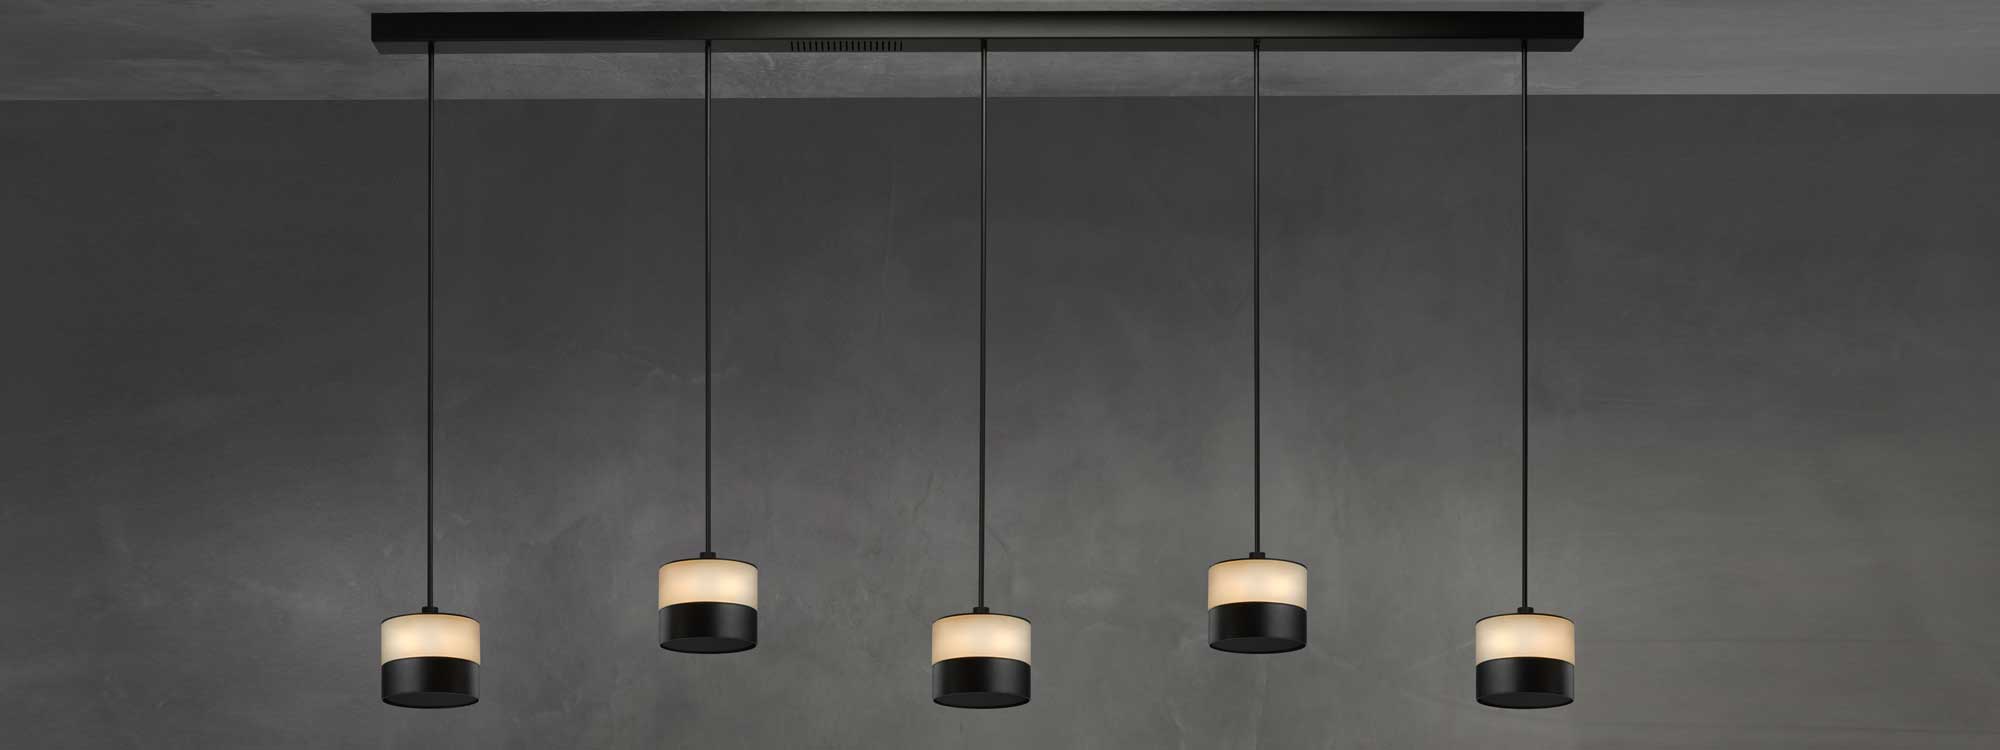 Image of row of 5 ceiling mounted Glow pendant outdoor heaters and lights in Midnight black by Heatsail